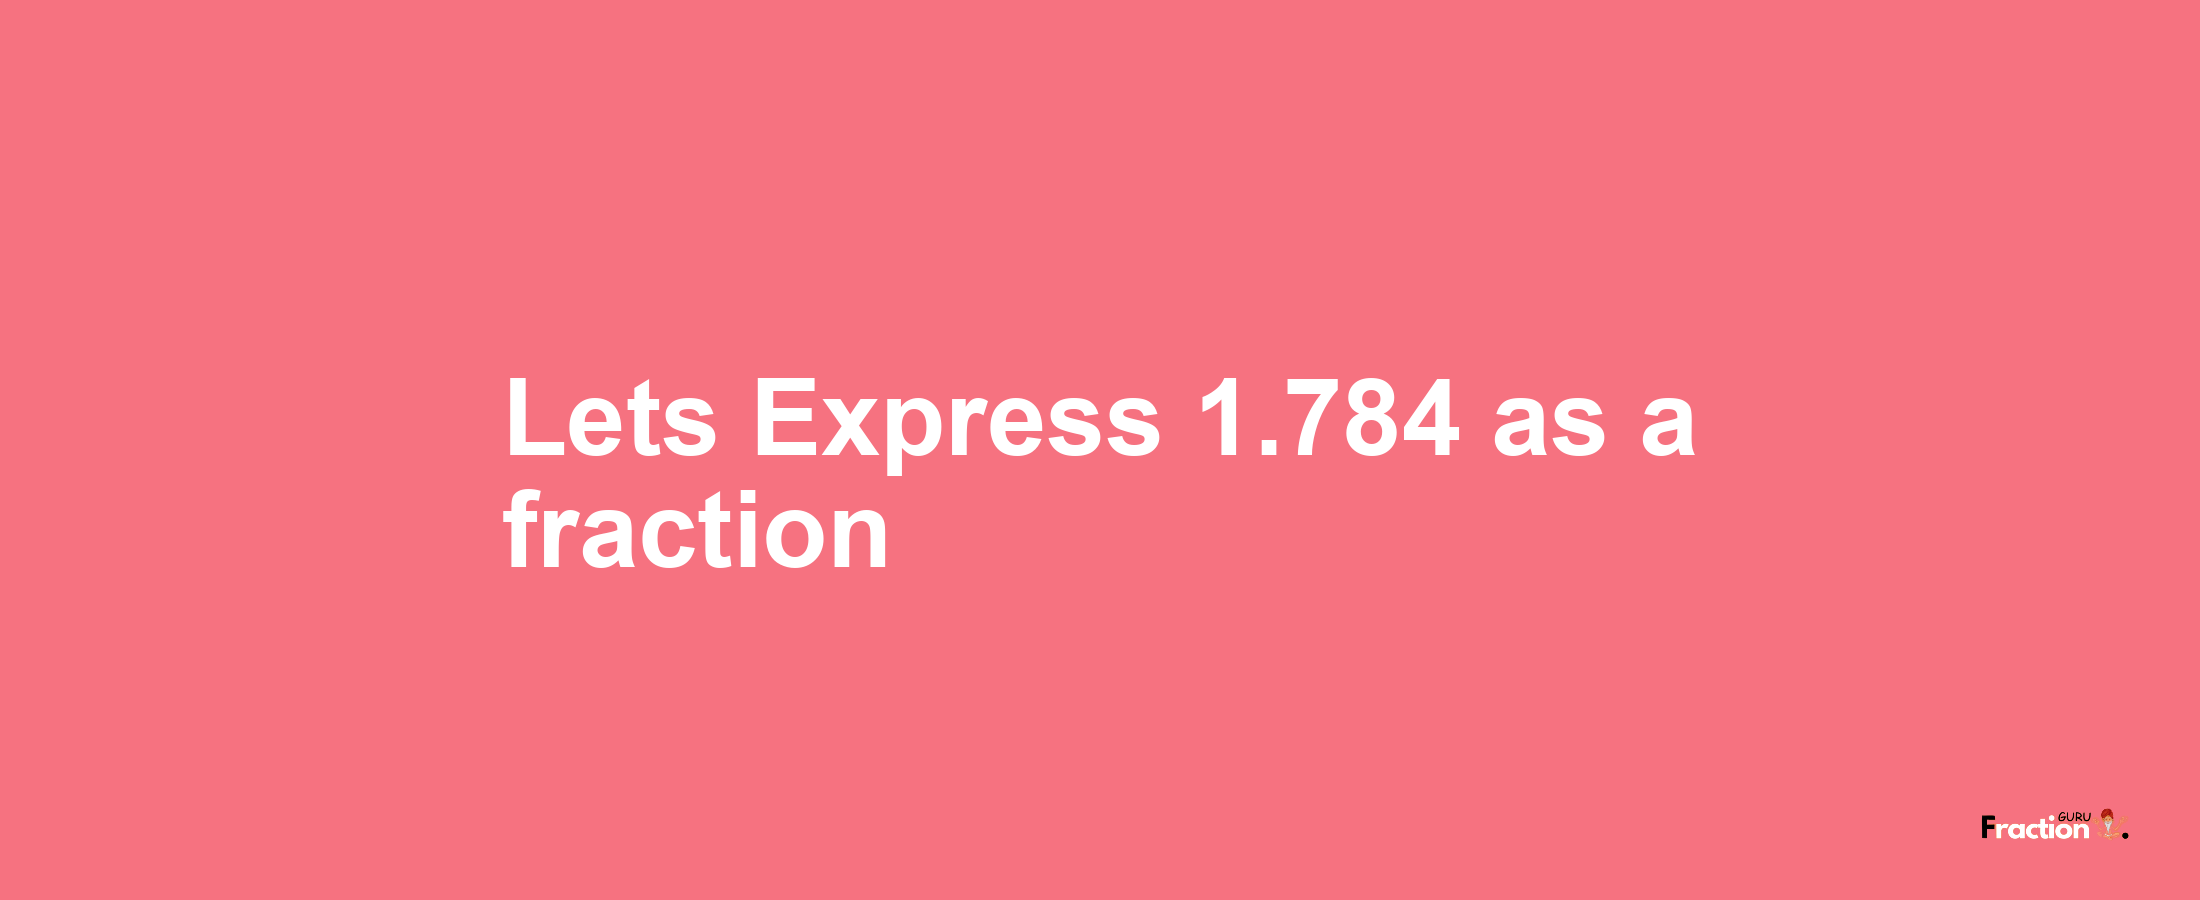 Lets Express 1.784 as afraction